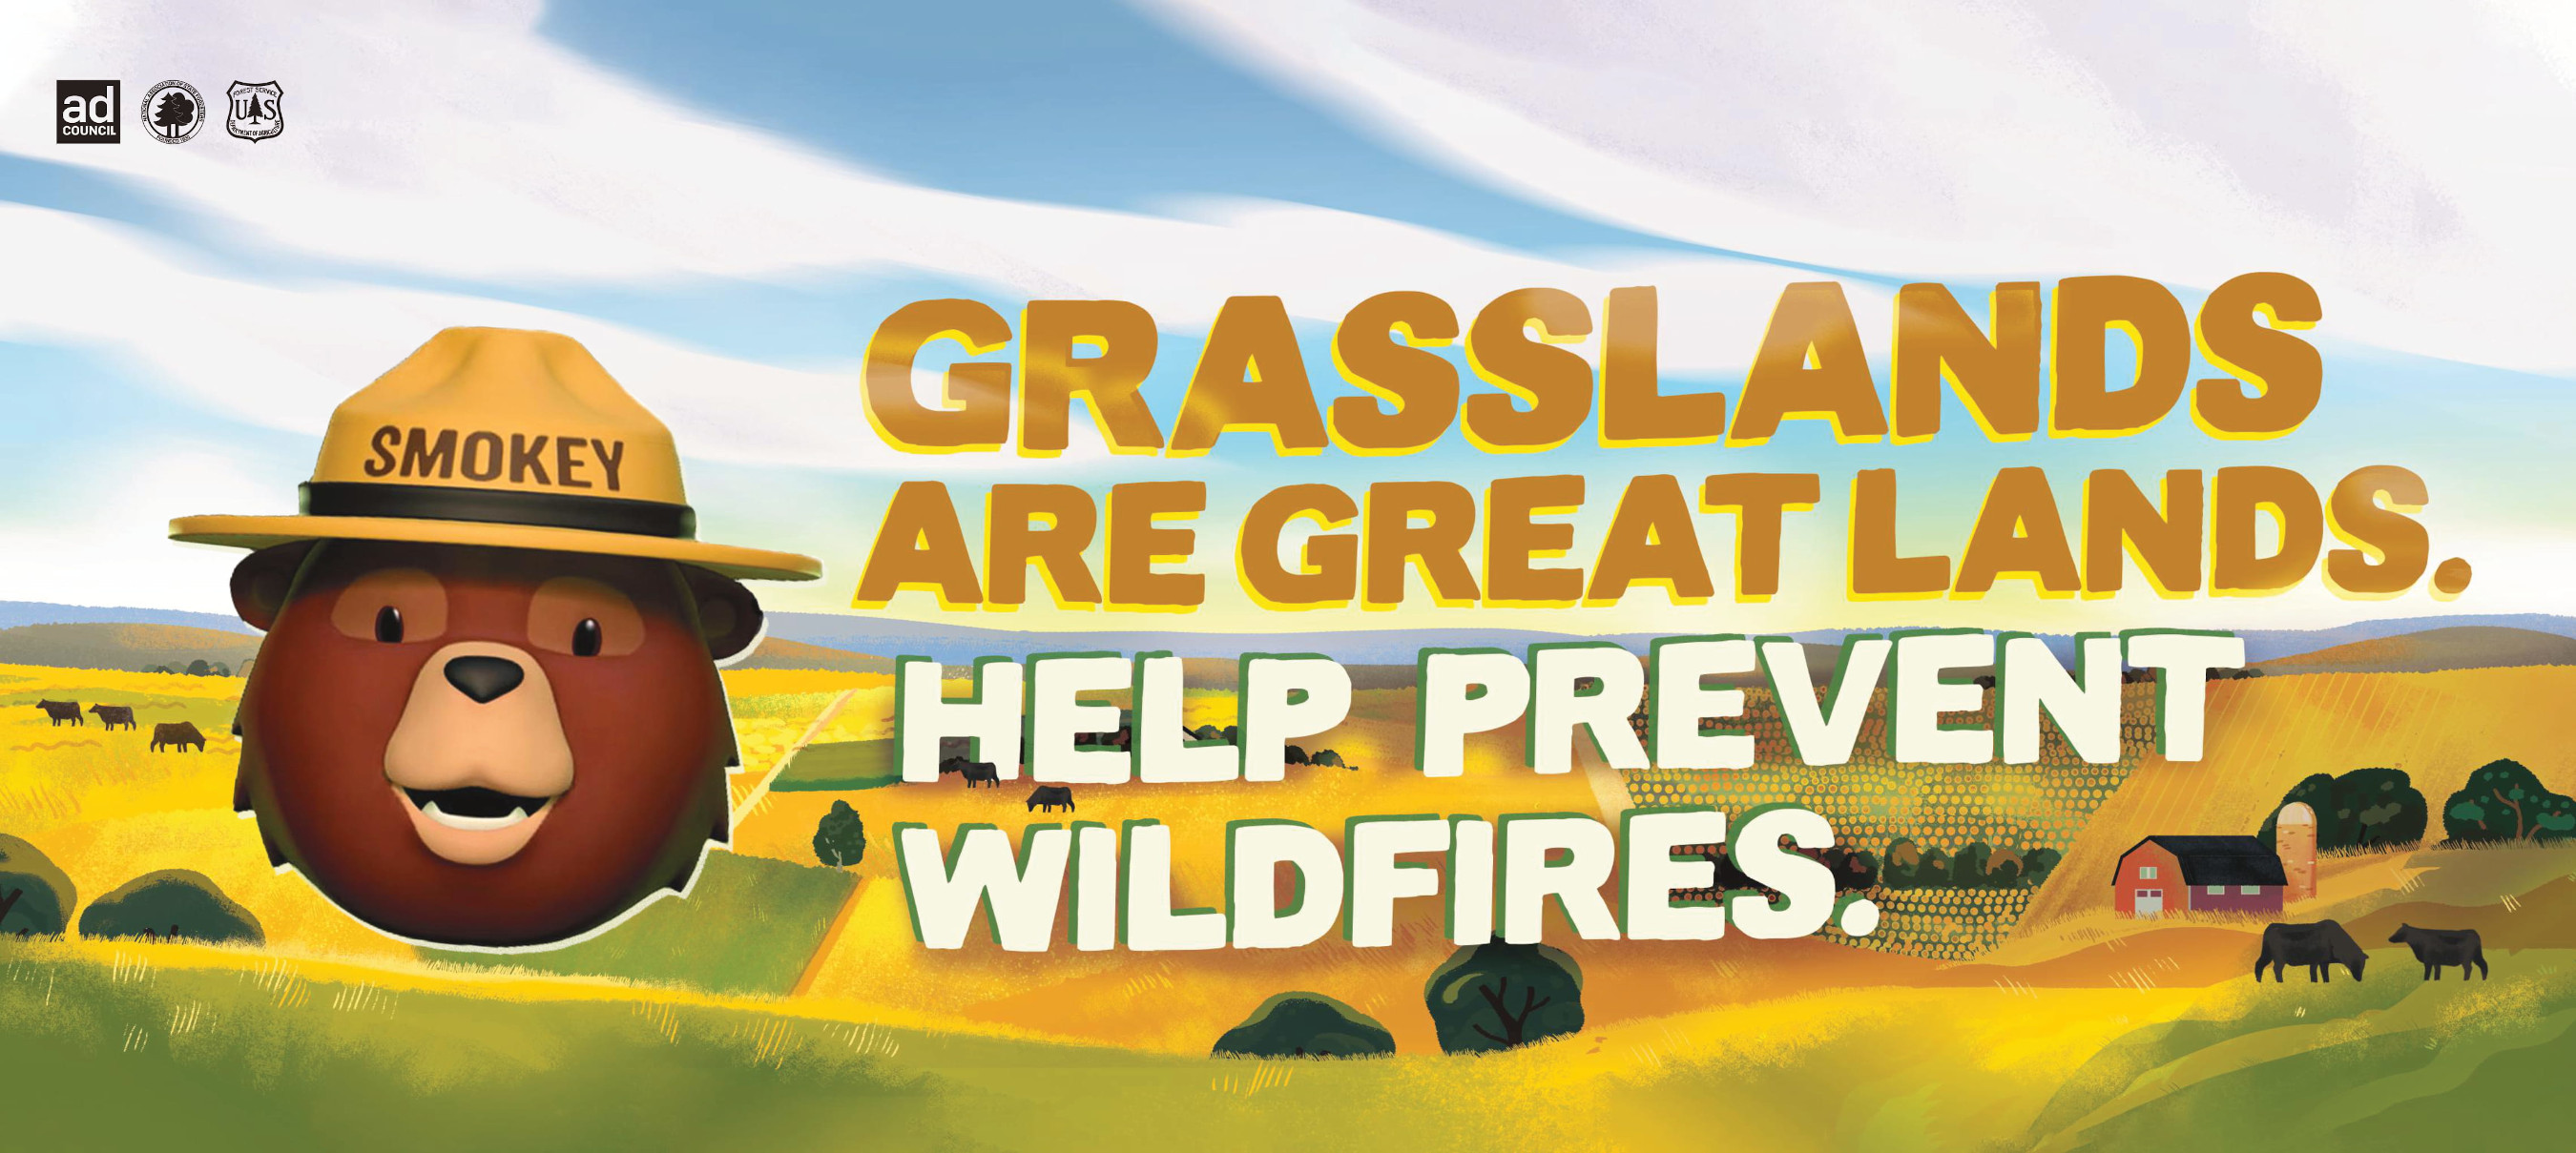 Smokey Bear OOH for the Southern Grasslands | Wildfire Prevention | Ad Council